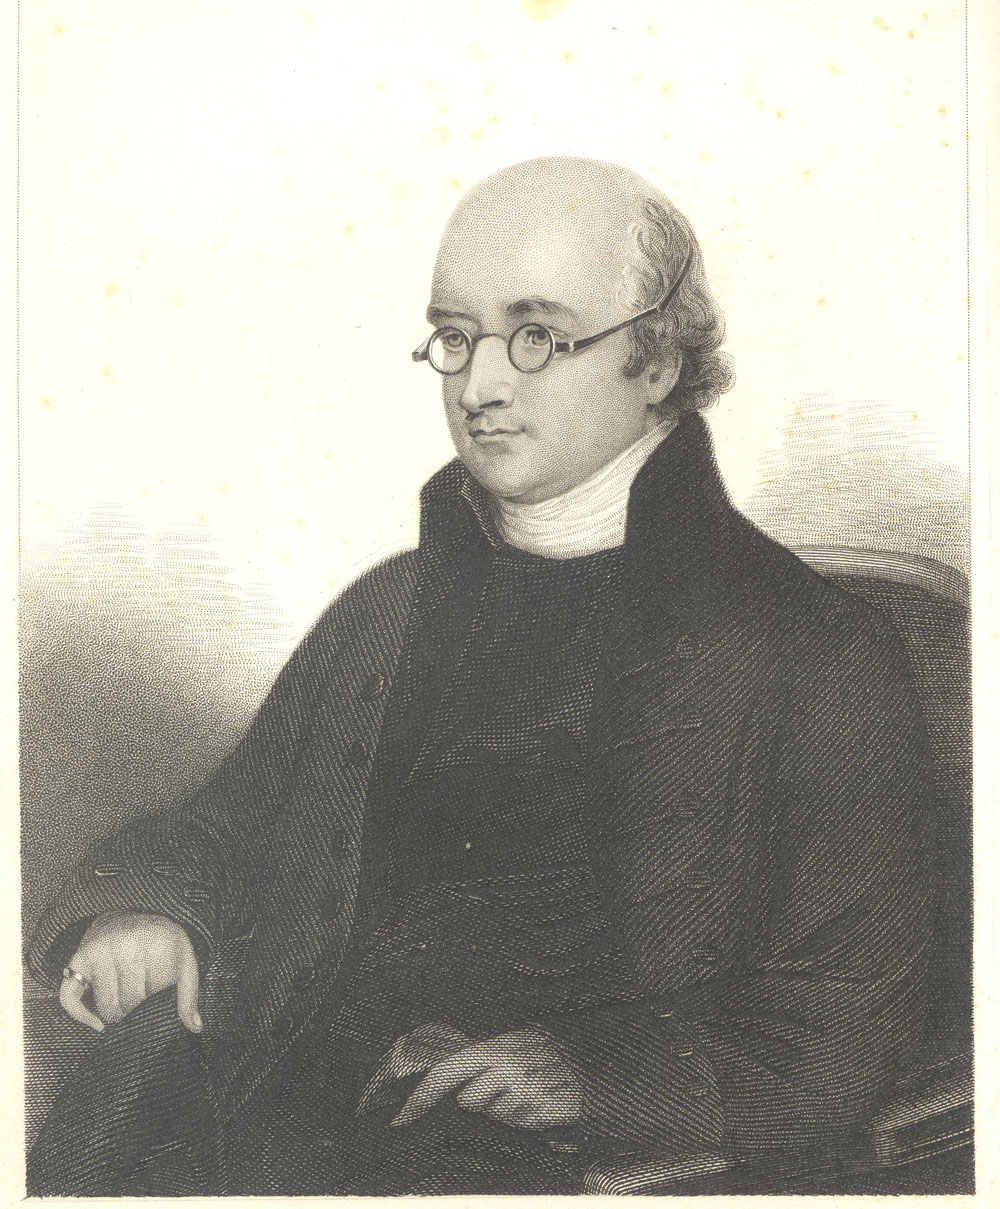 Line drawing of Bishop Mant from "A Memoir of the Life of Bishop Mant" by his some-time Brother-Fellow Archdeacon Berens (London, 1849)